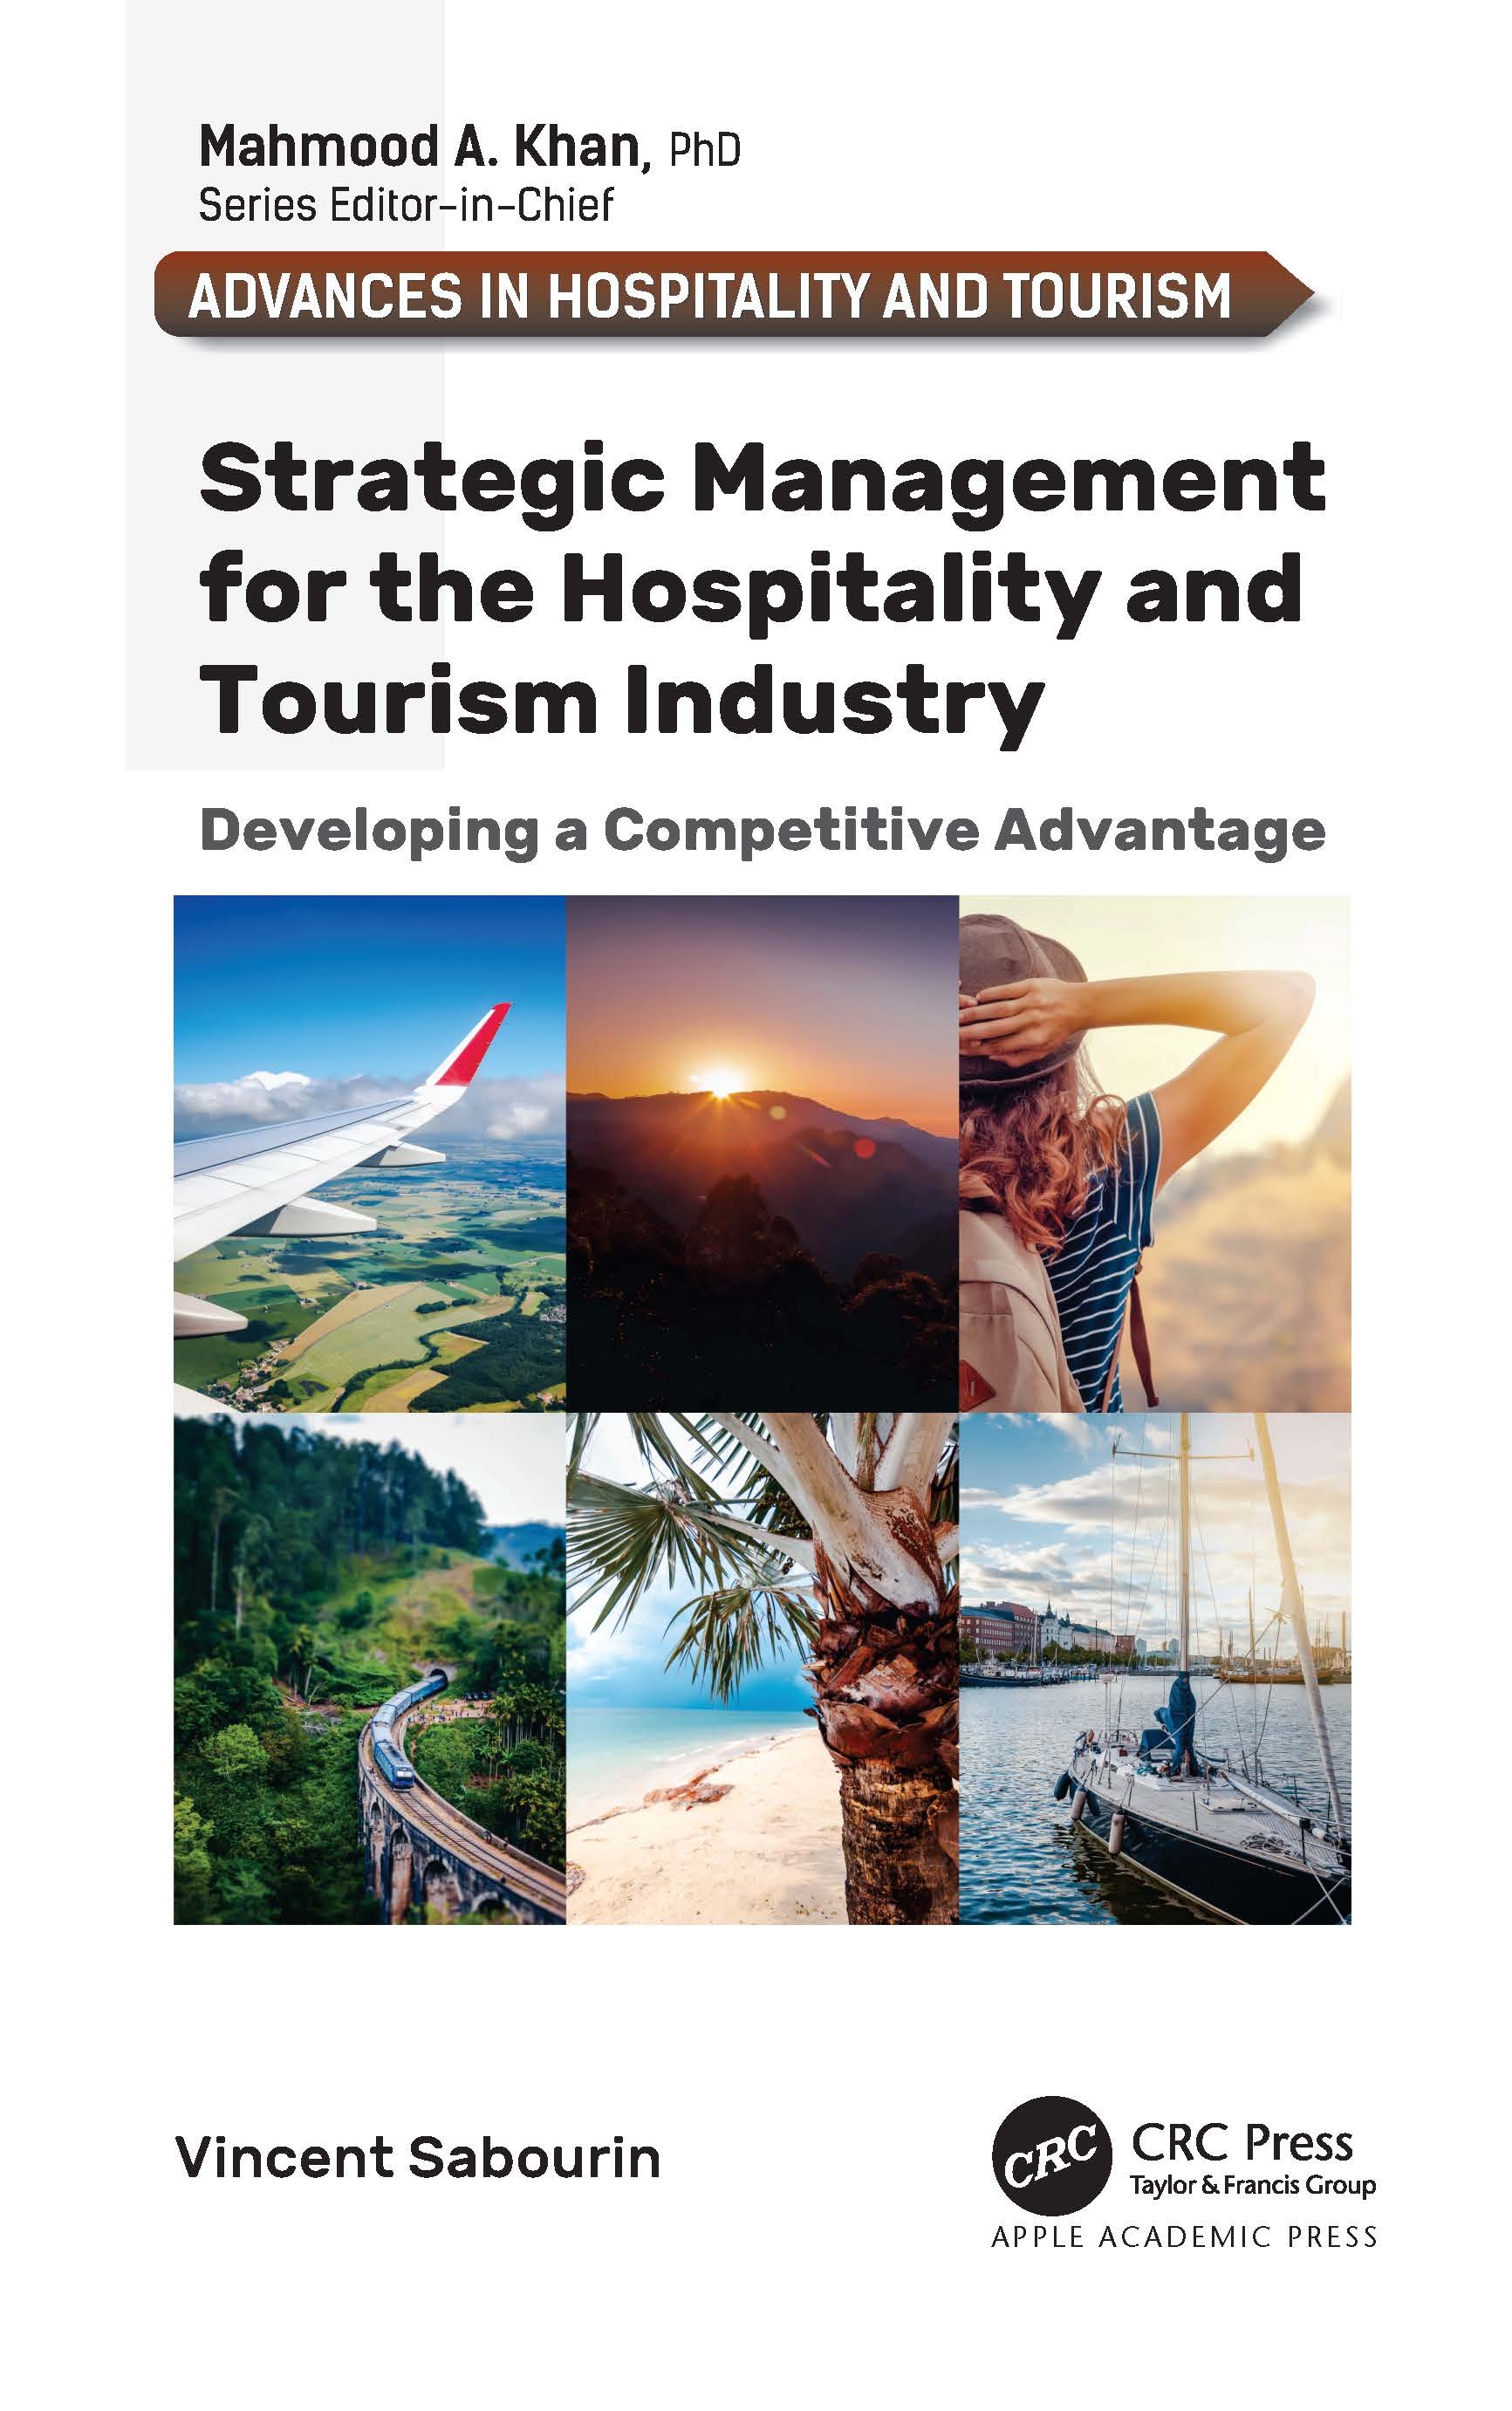 Strategic Management for Hospitality and Tourism Industry: Developing a Competitive Advantage